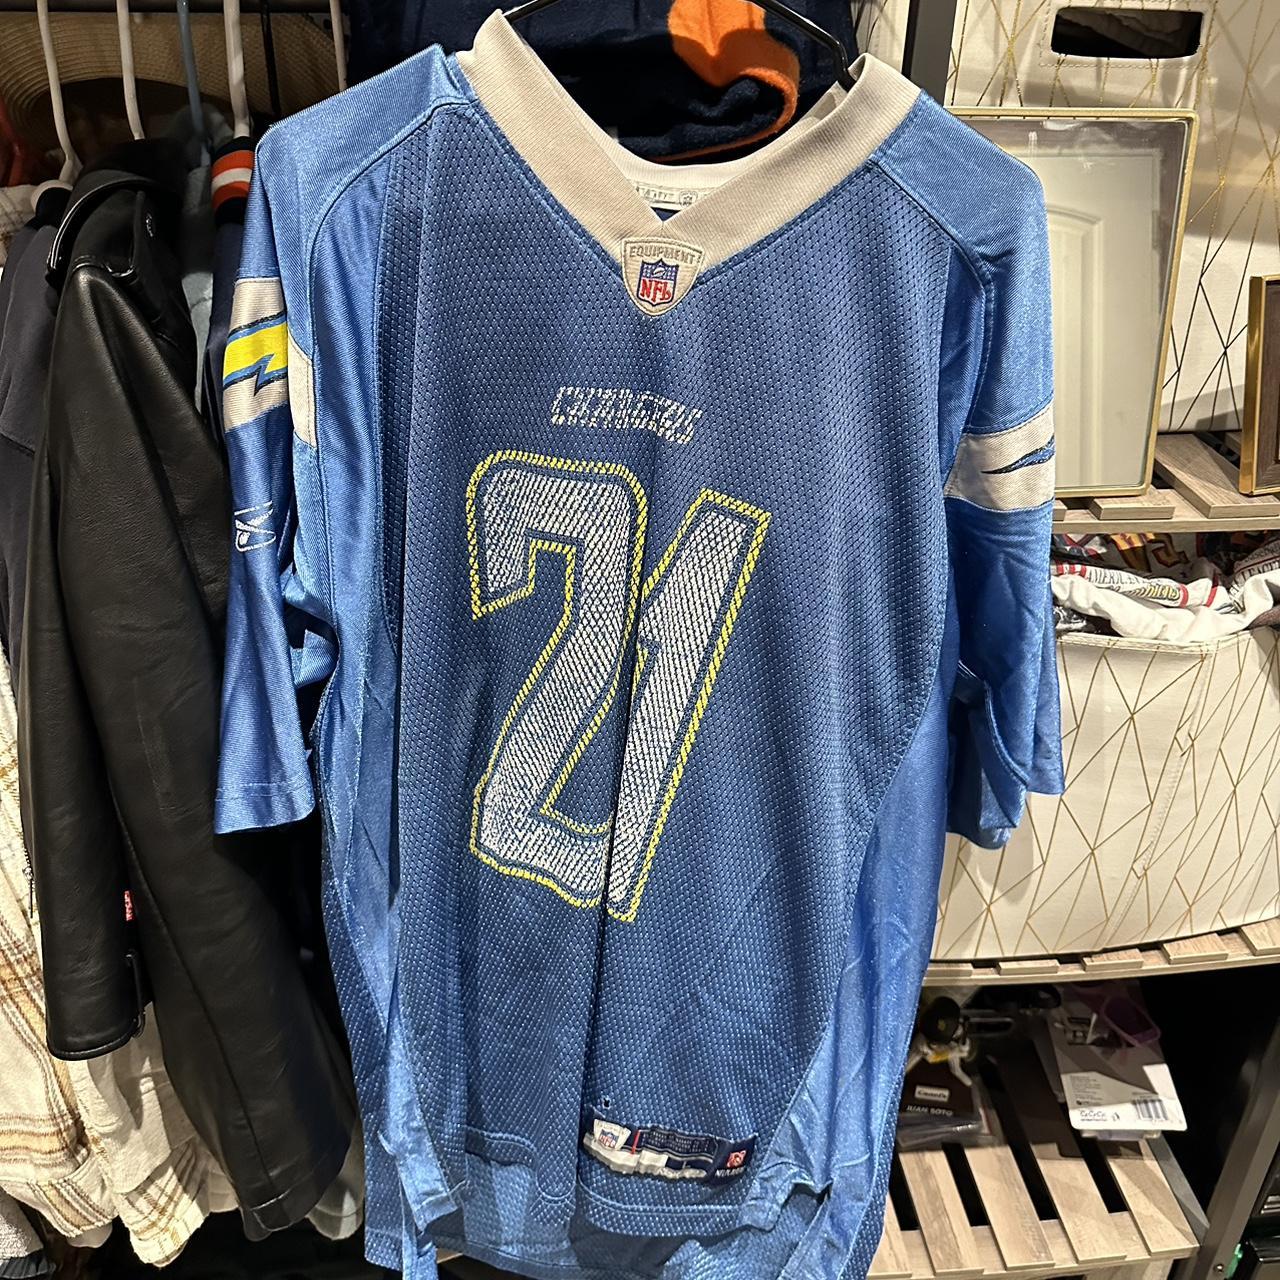 ladainian tomlinson san diego chargers jersey